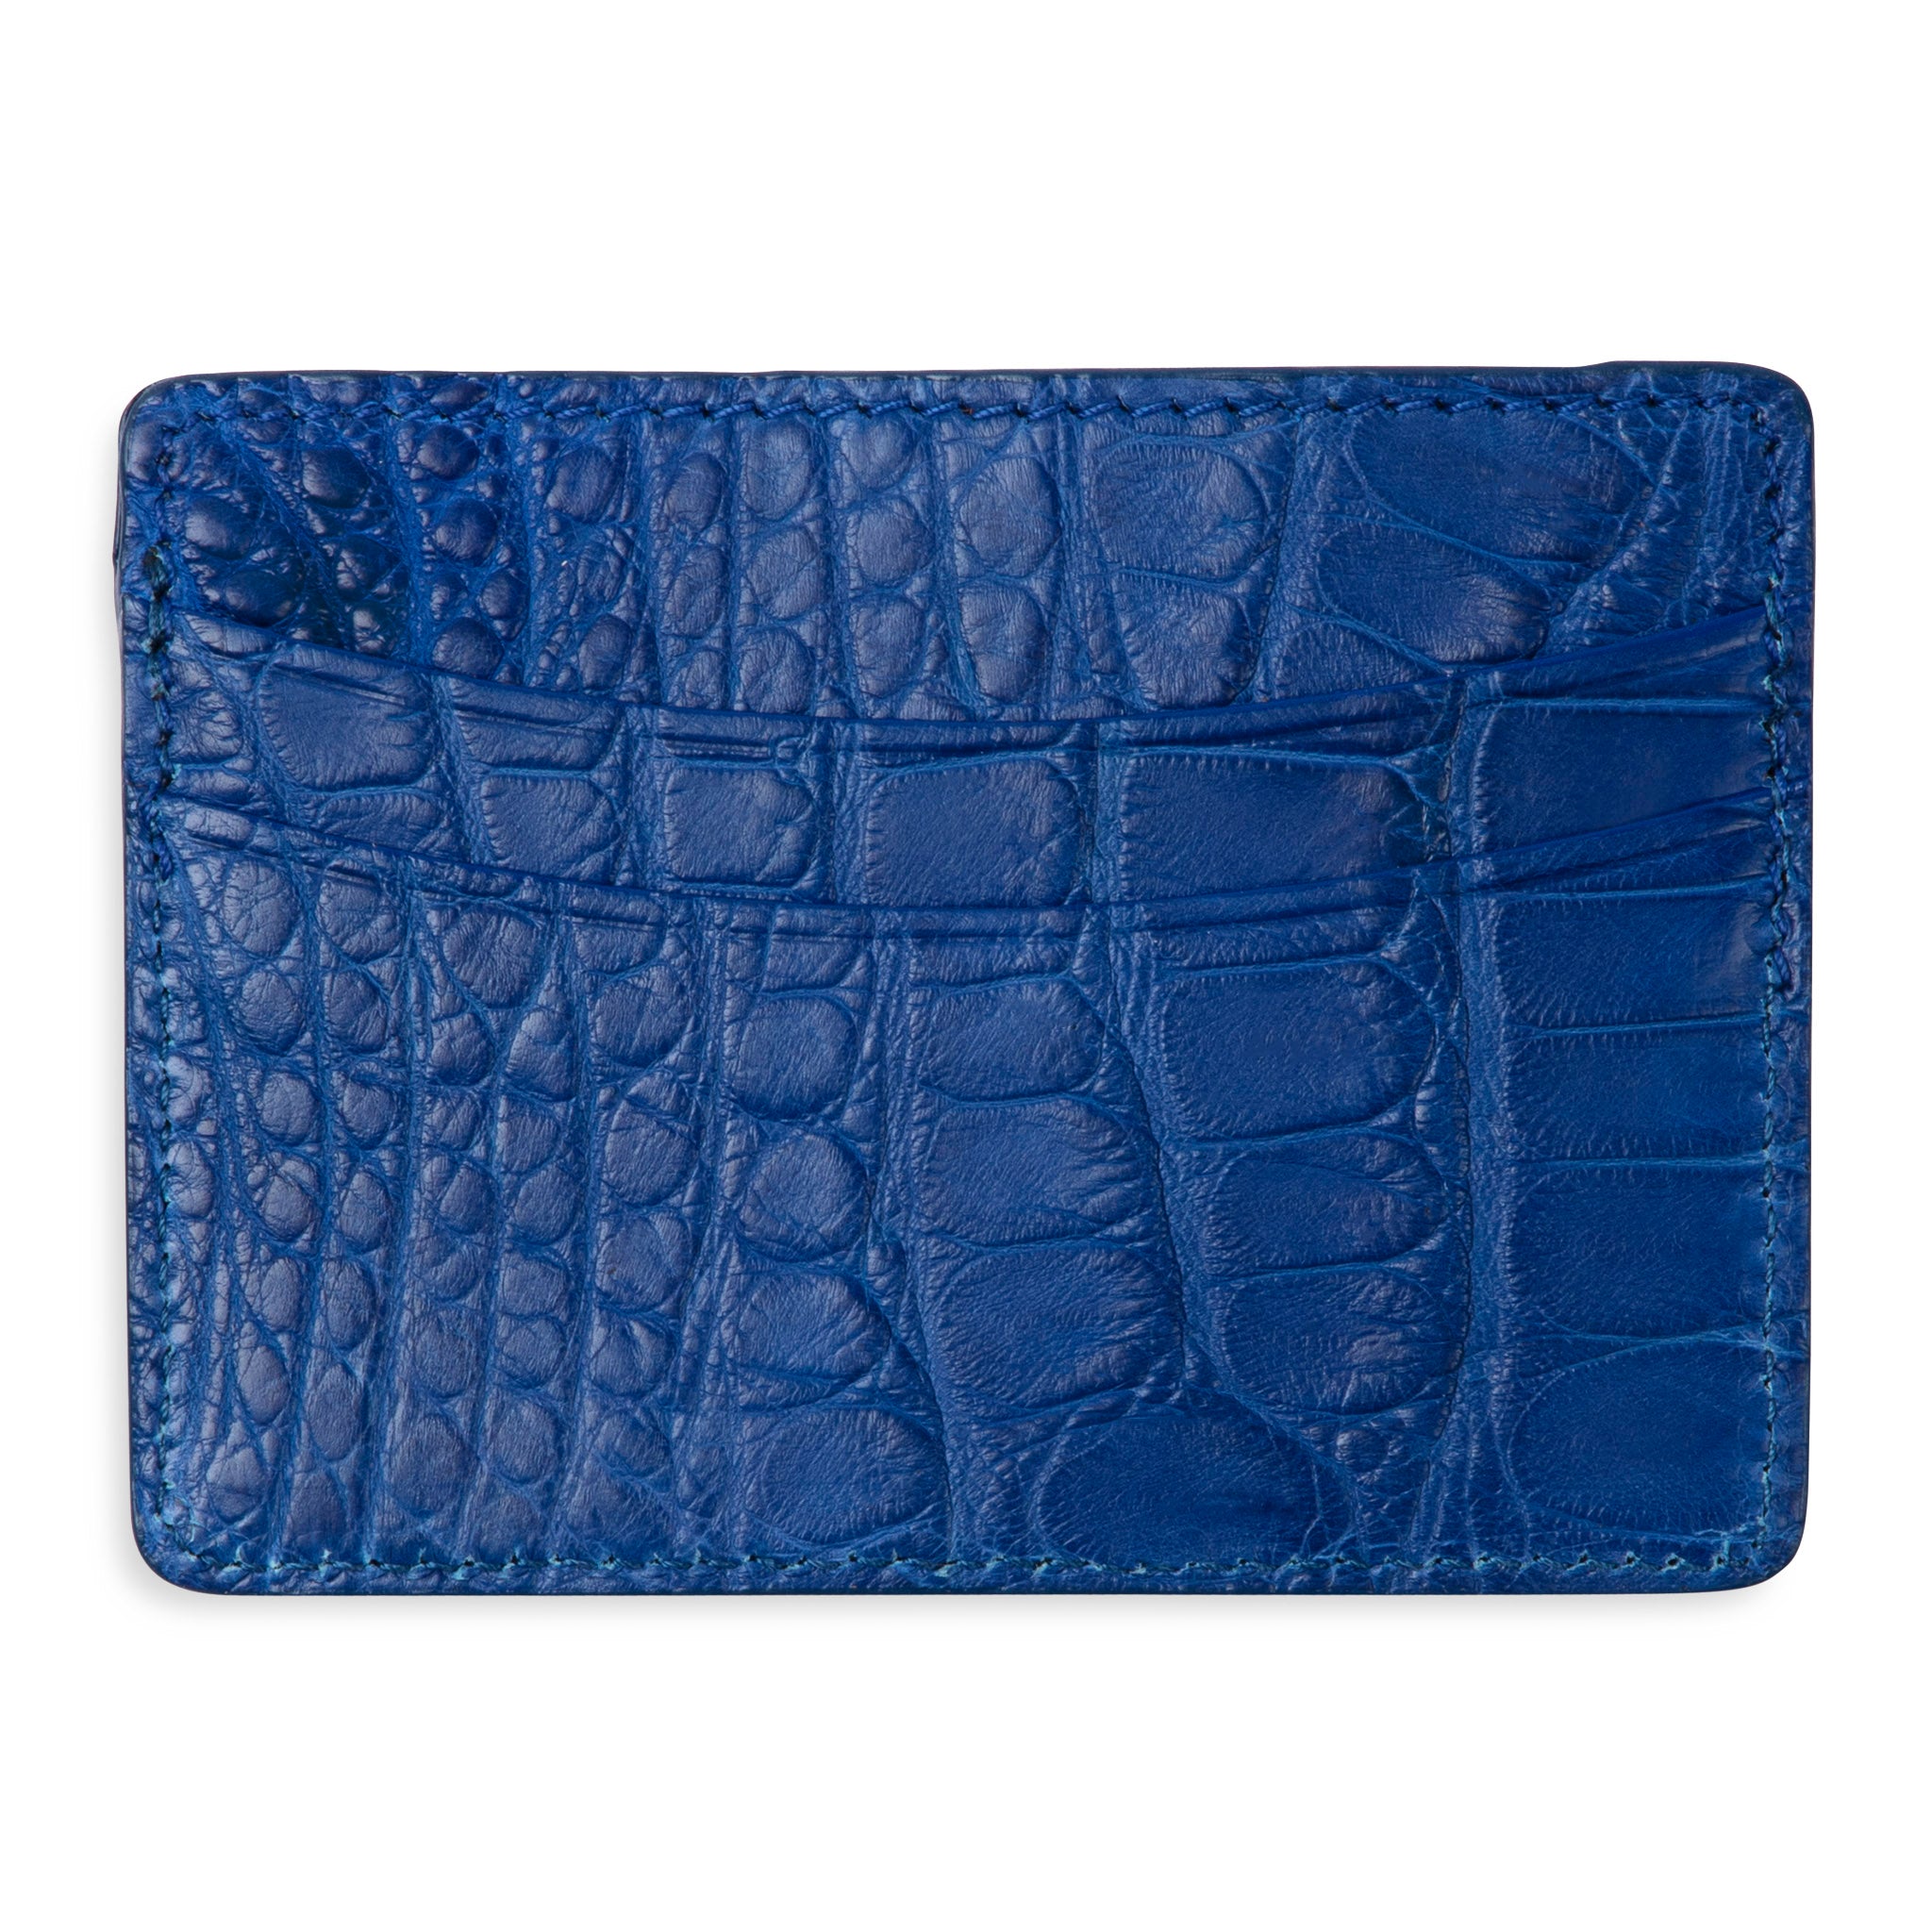 Creed Boutique Universal Leather Sample Wallet - Blue Blue